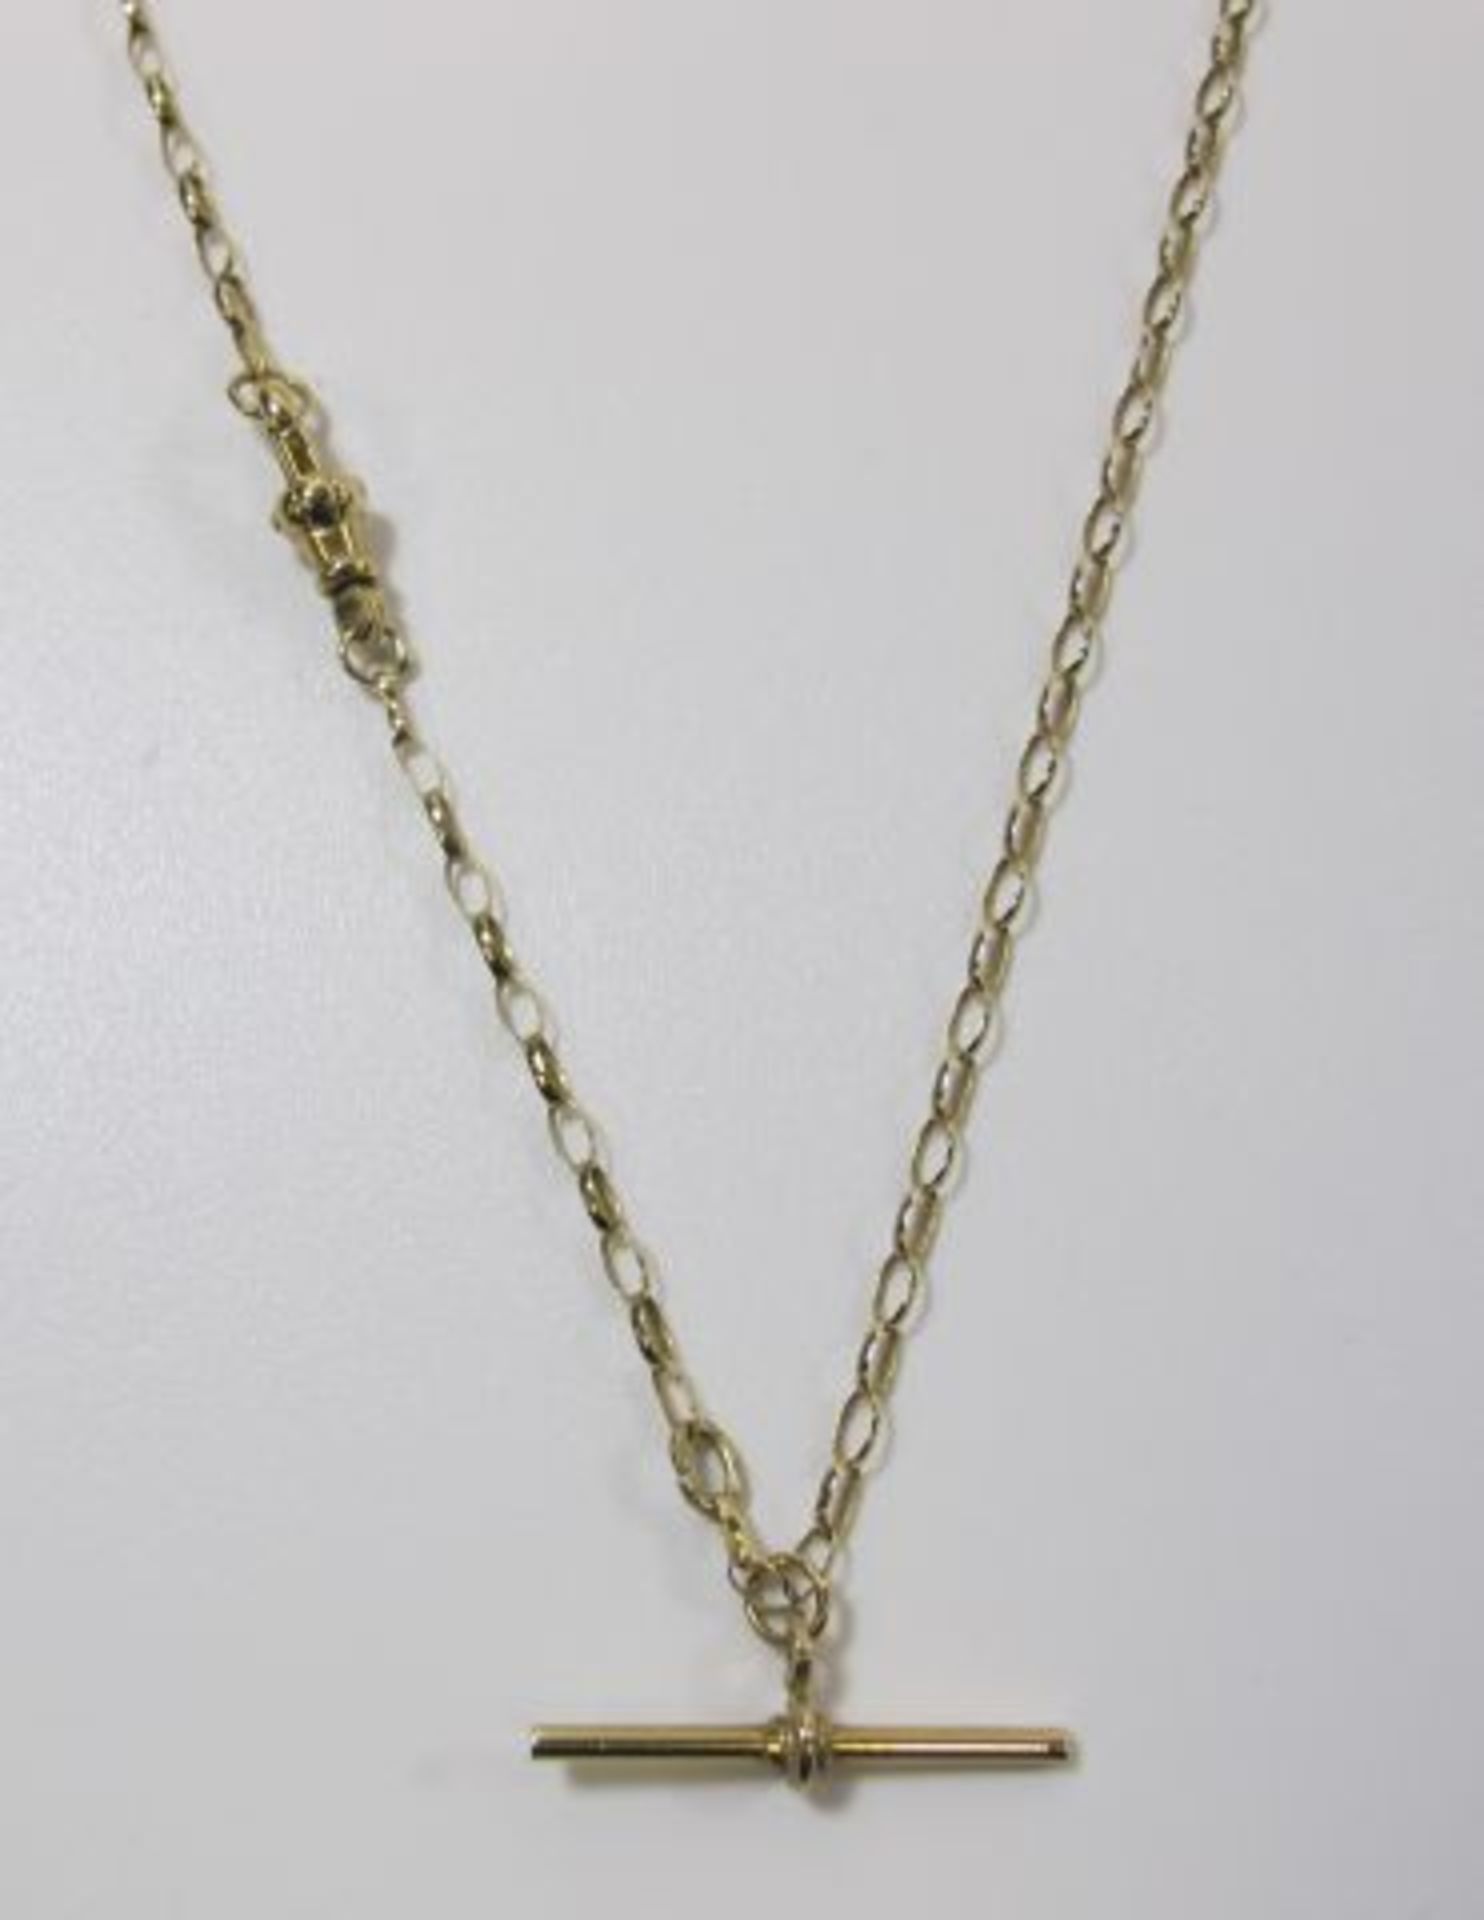 9ct Gold Albert Style Neck Chain (est. £40-£60) - Image 2 of 2